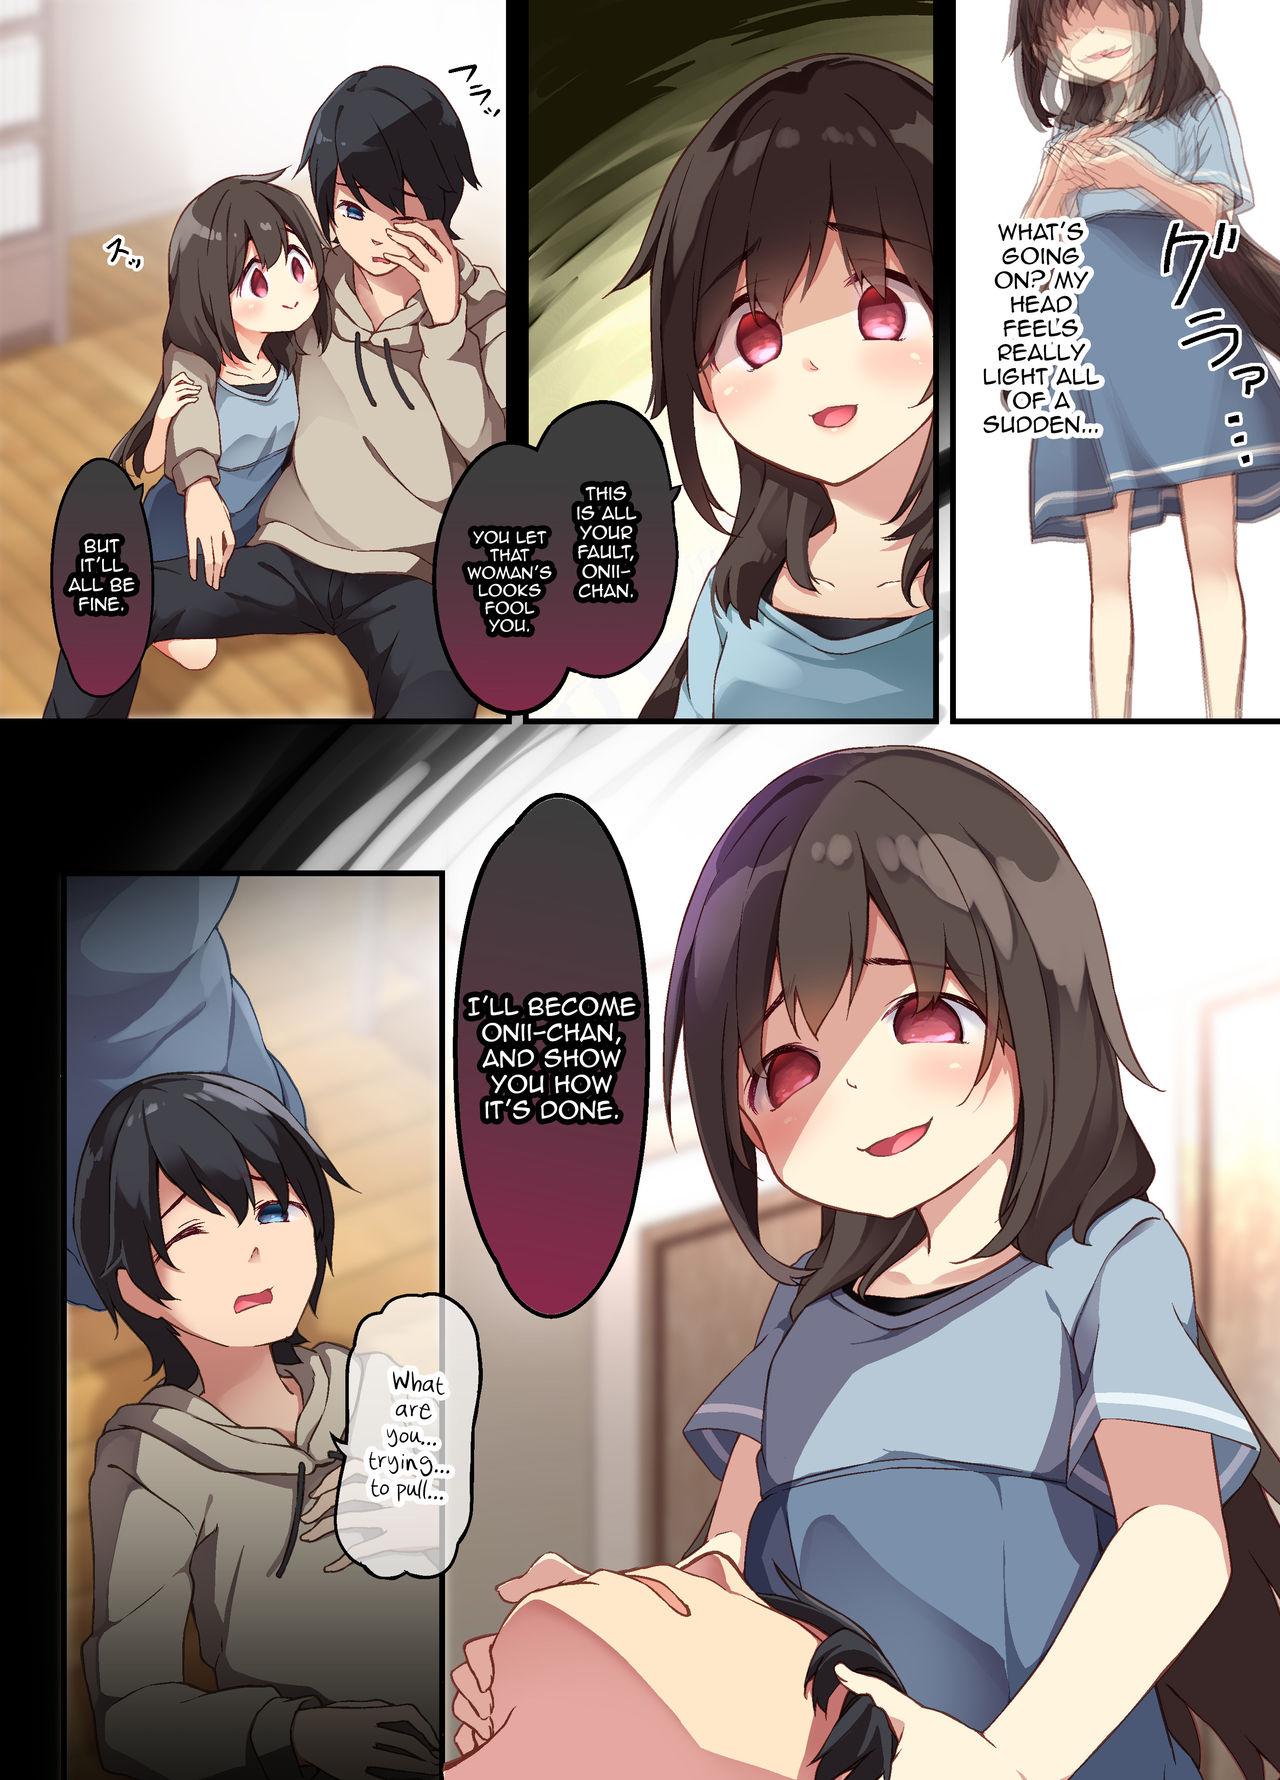 A Yandere Little Sister Wants to Be Impregnated by Her Big Brother, So She Switches Bodies With Him and They Have Baby-Making Sex 7